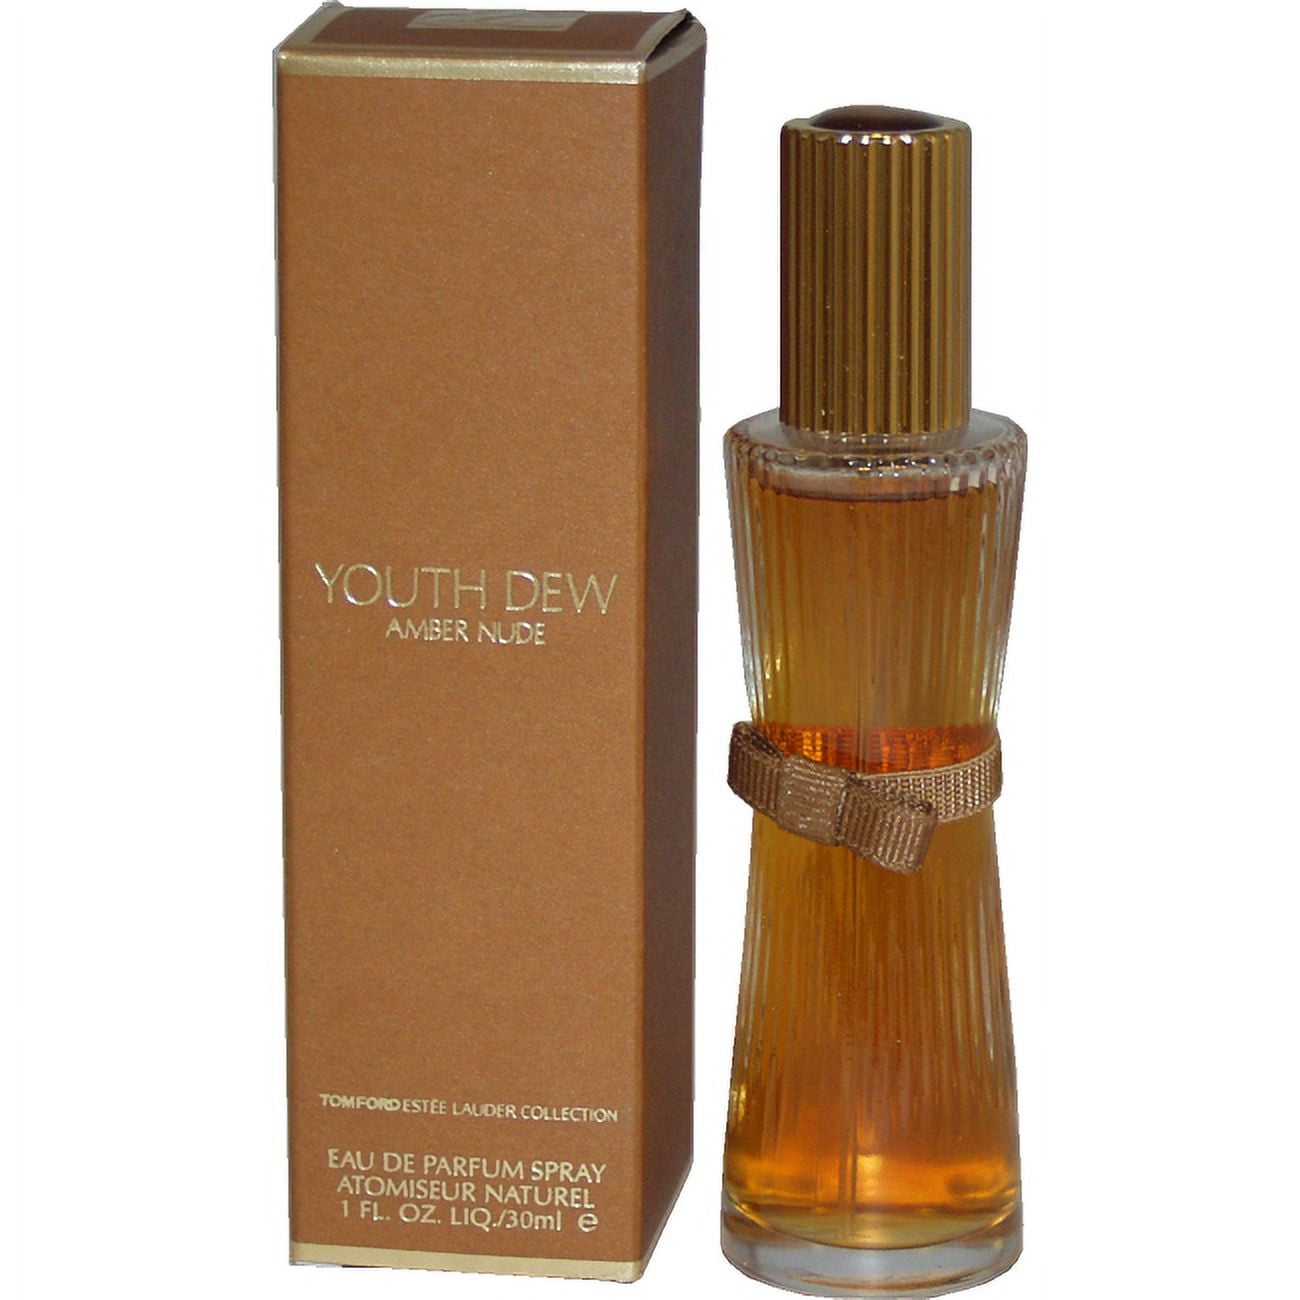 Youth-Dew Amber Nude Estée Lauder perfume - a fragrance for women